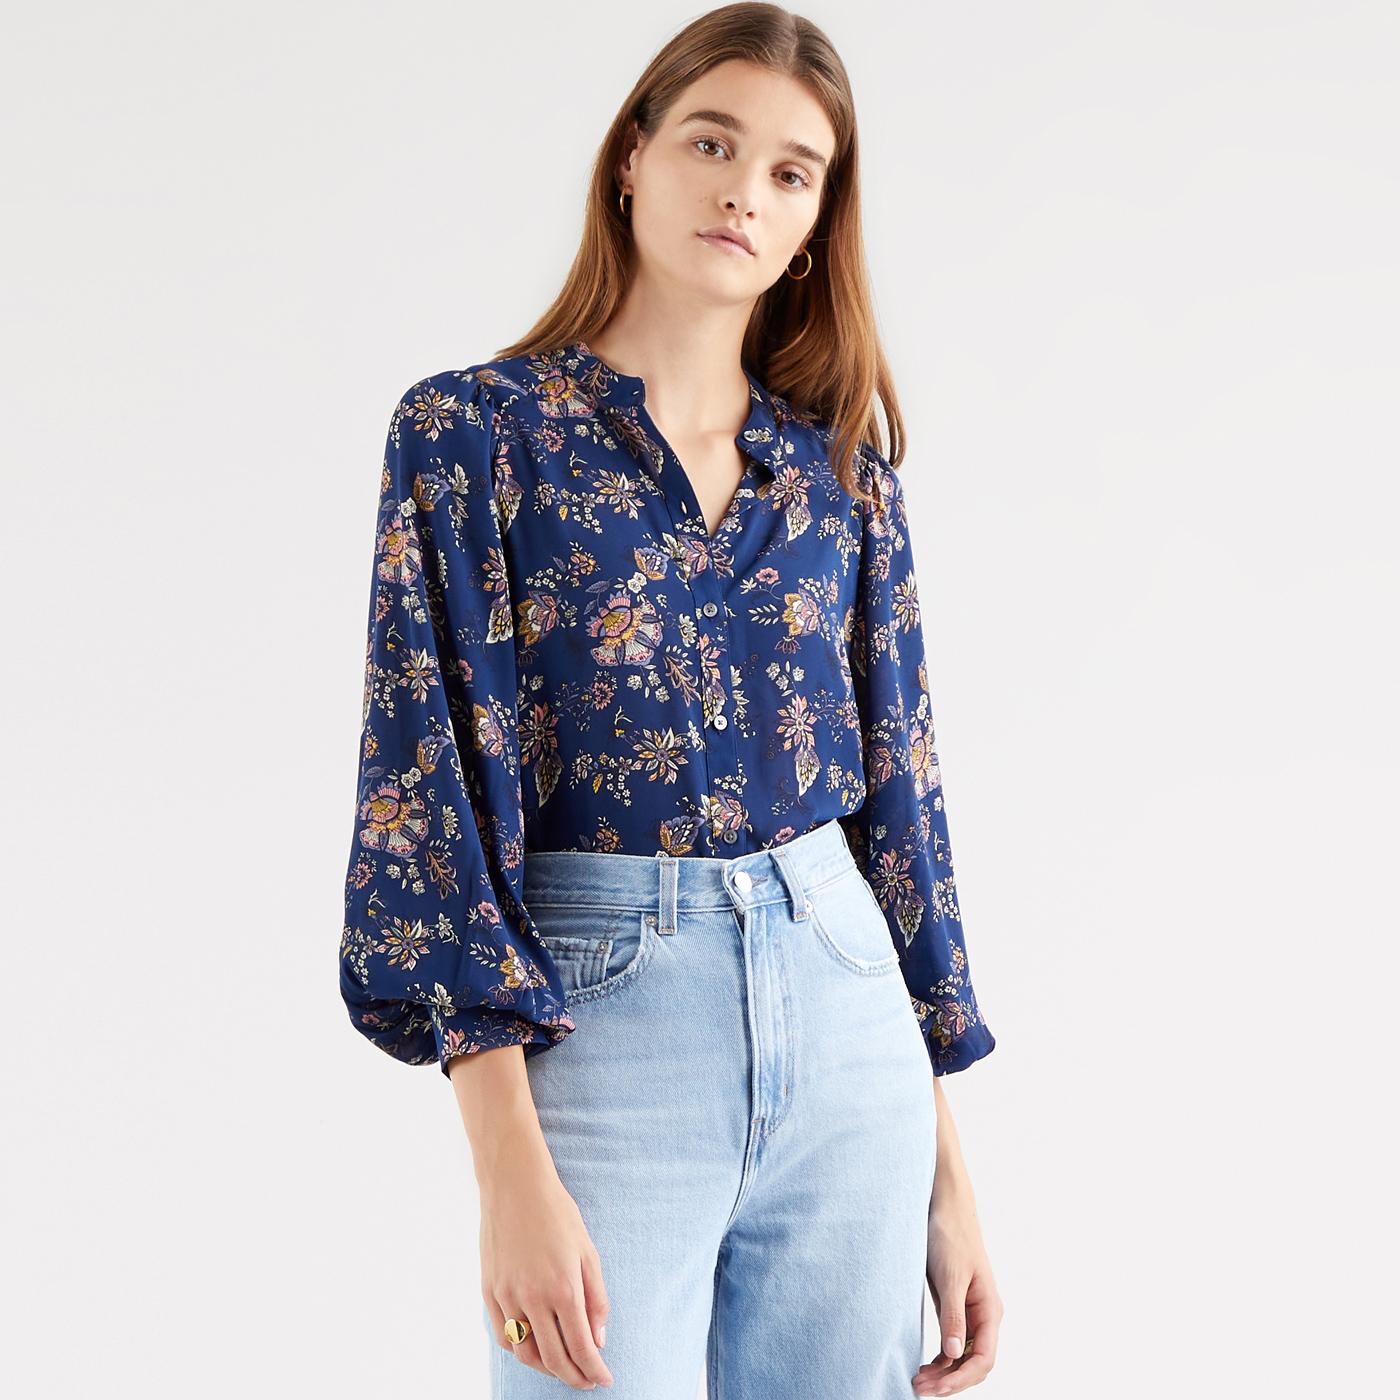 Hadley LEVI'S Jacobean Floral Paisley Blouse in Navy Peony